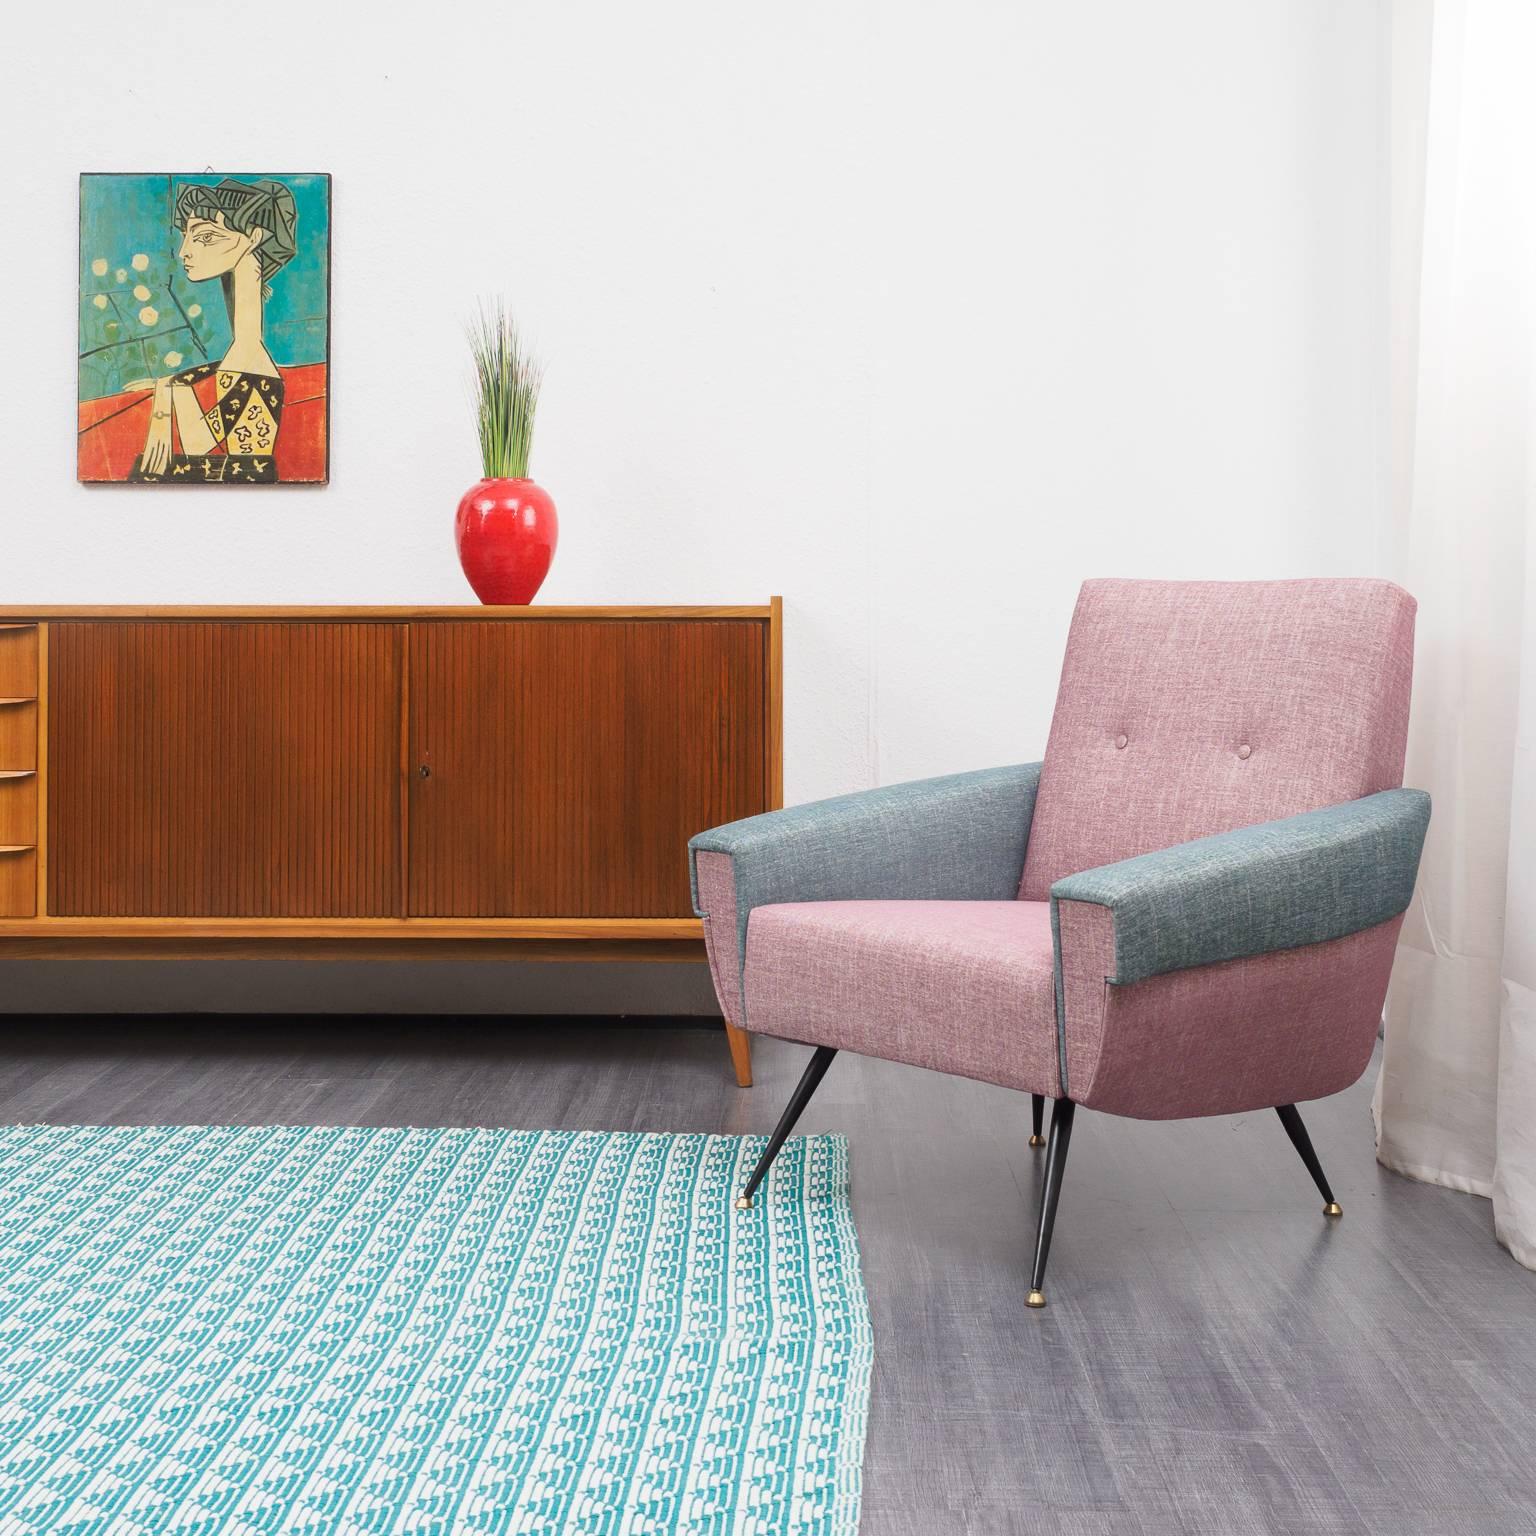 Professionally and lovingly reupholstered 1950s easy chair with new foam and high quality fabric. The elegant chair comes in the color tone rose quartz with broad armrests in teal-green. The feet are made in delicate black varnished metal with brass